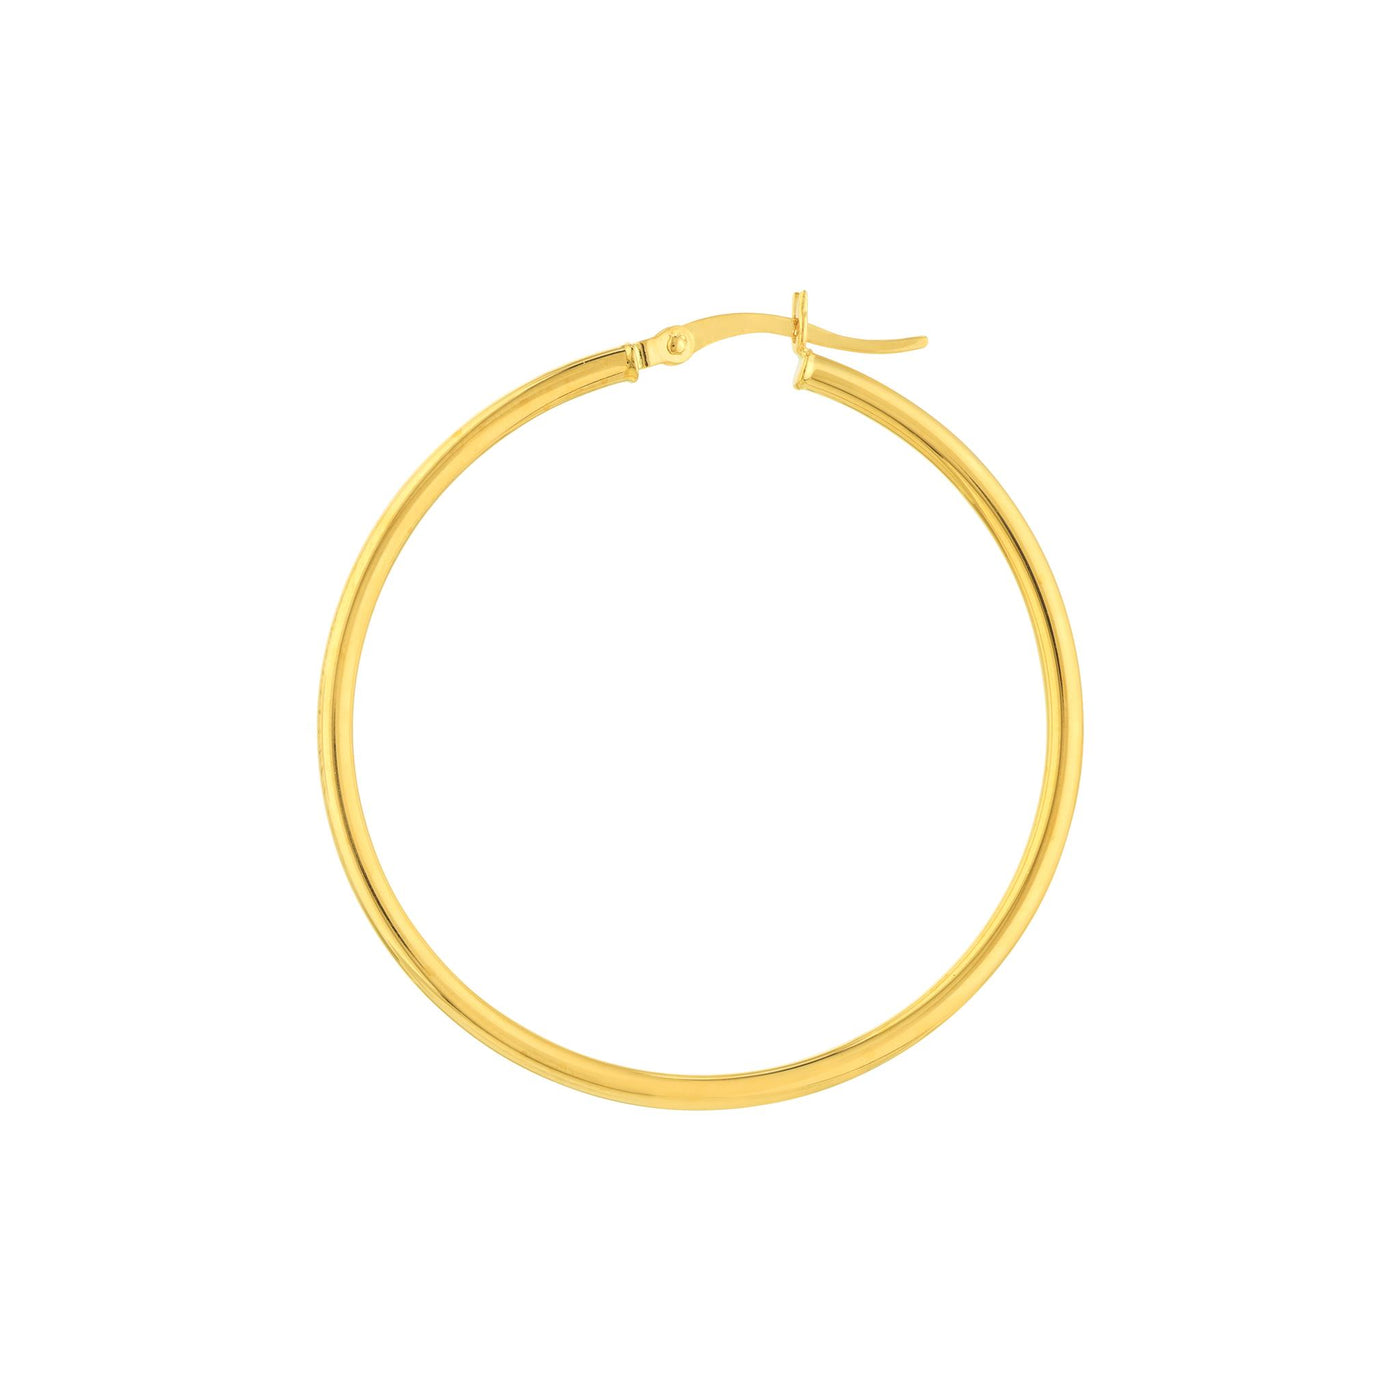 14K Yellow Gold 2mm x 40mm Round Tube Design Round Hoop Style Earrings